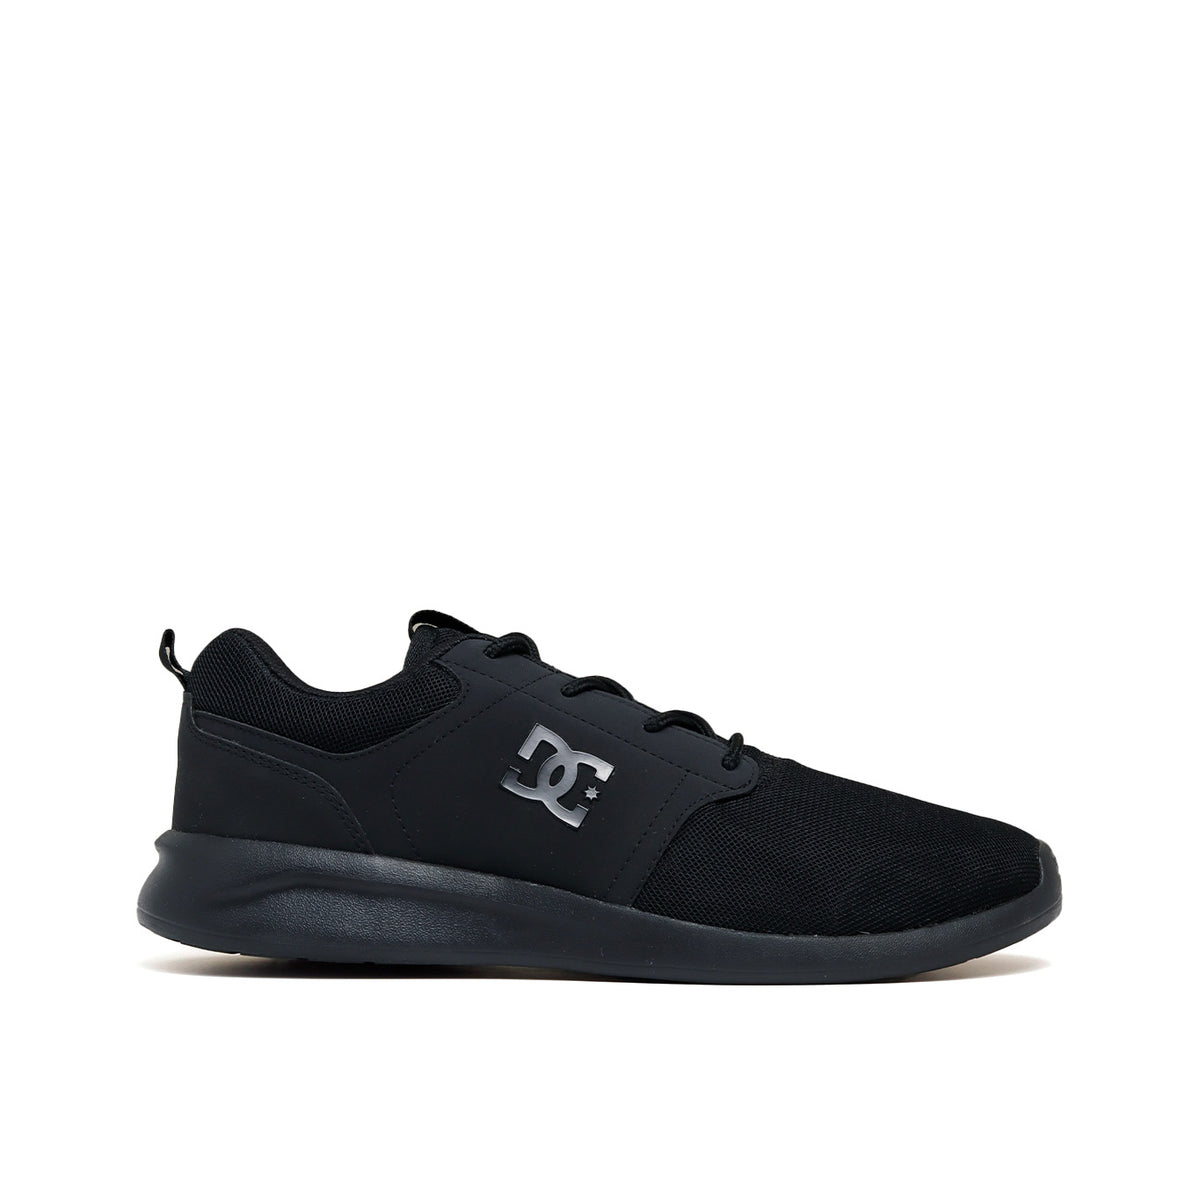 Tenis Dc Shoes Hombre Midway Mx Azul Lifestyle ADYS700136-NGY